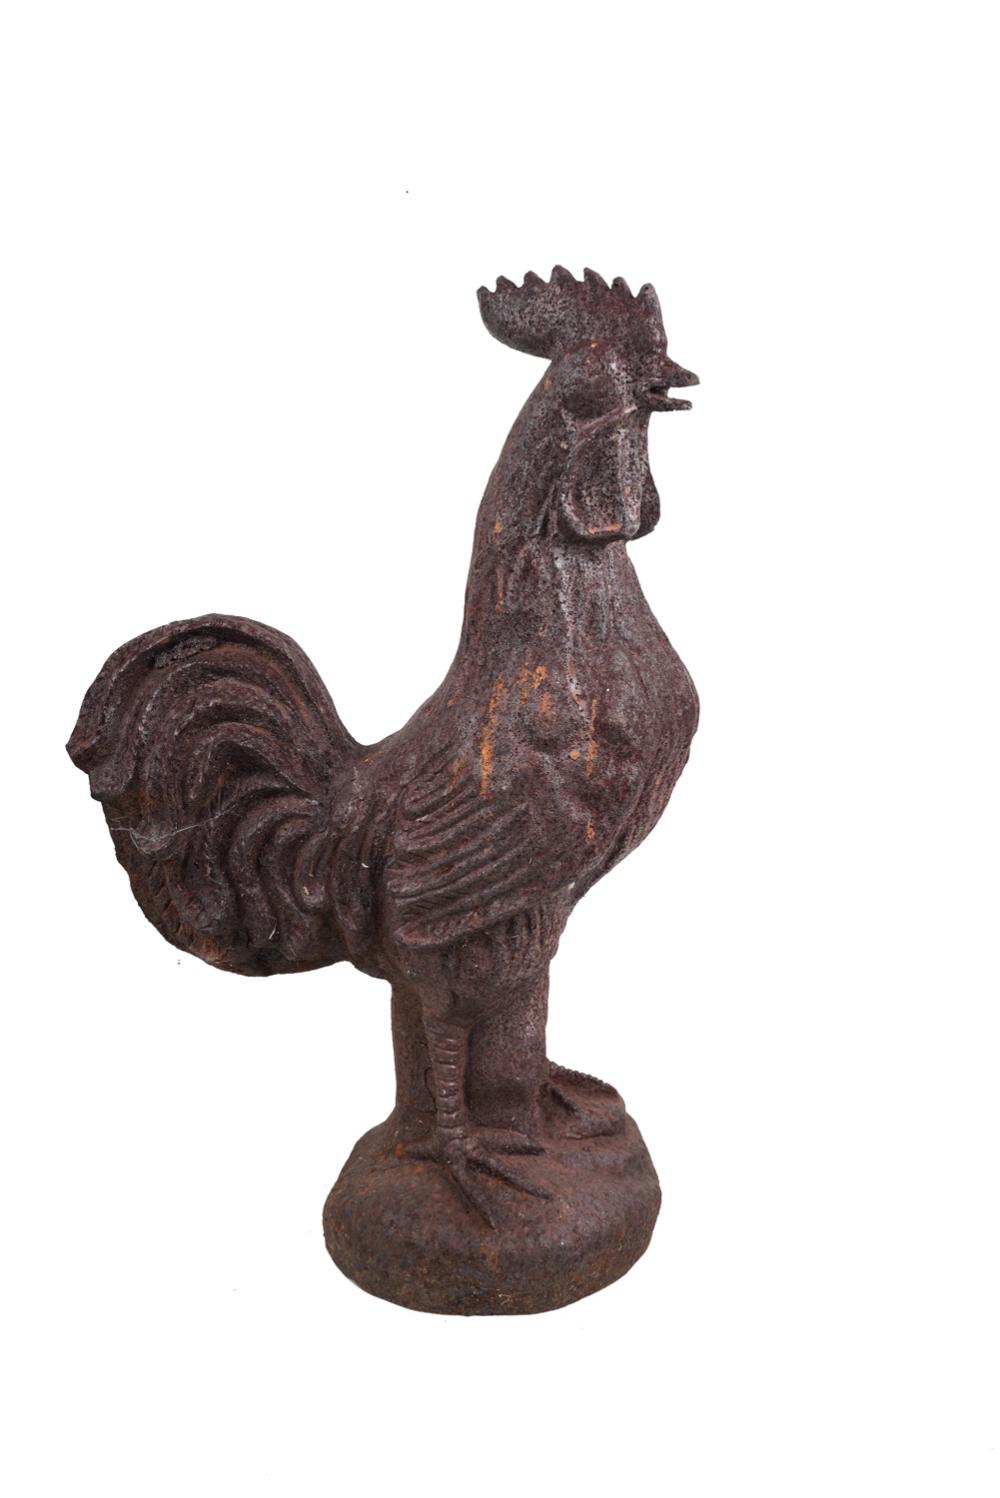 CAST IRON ROOSTER23 inches high